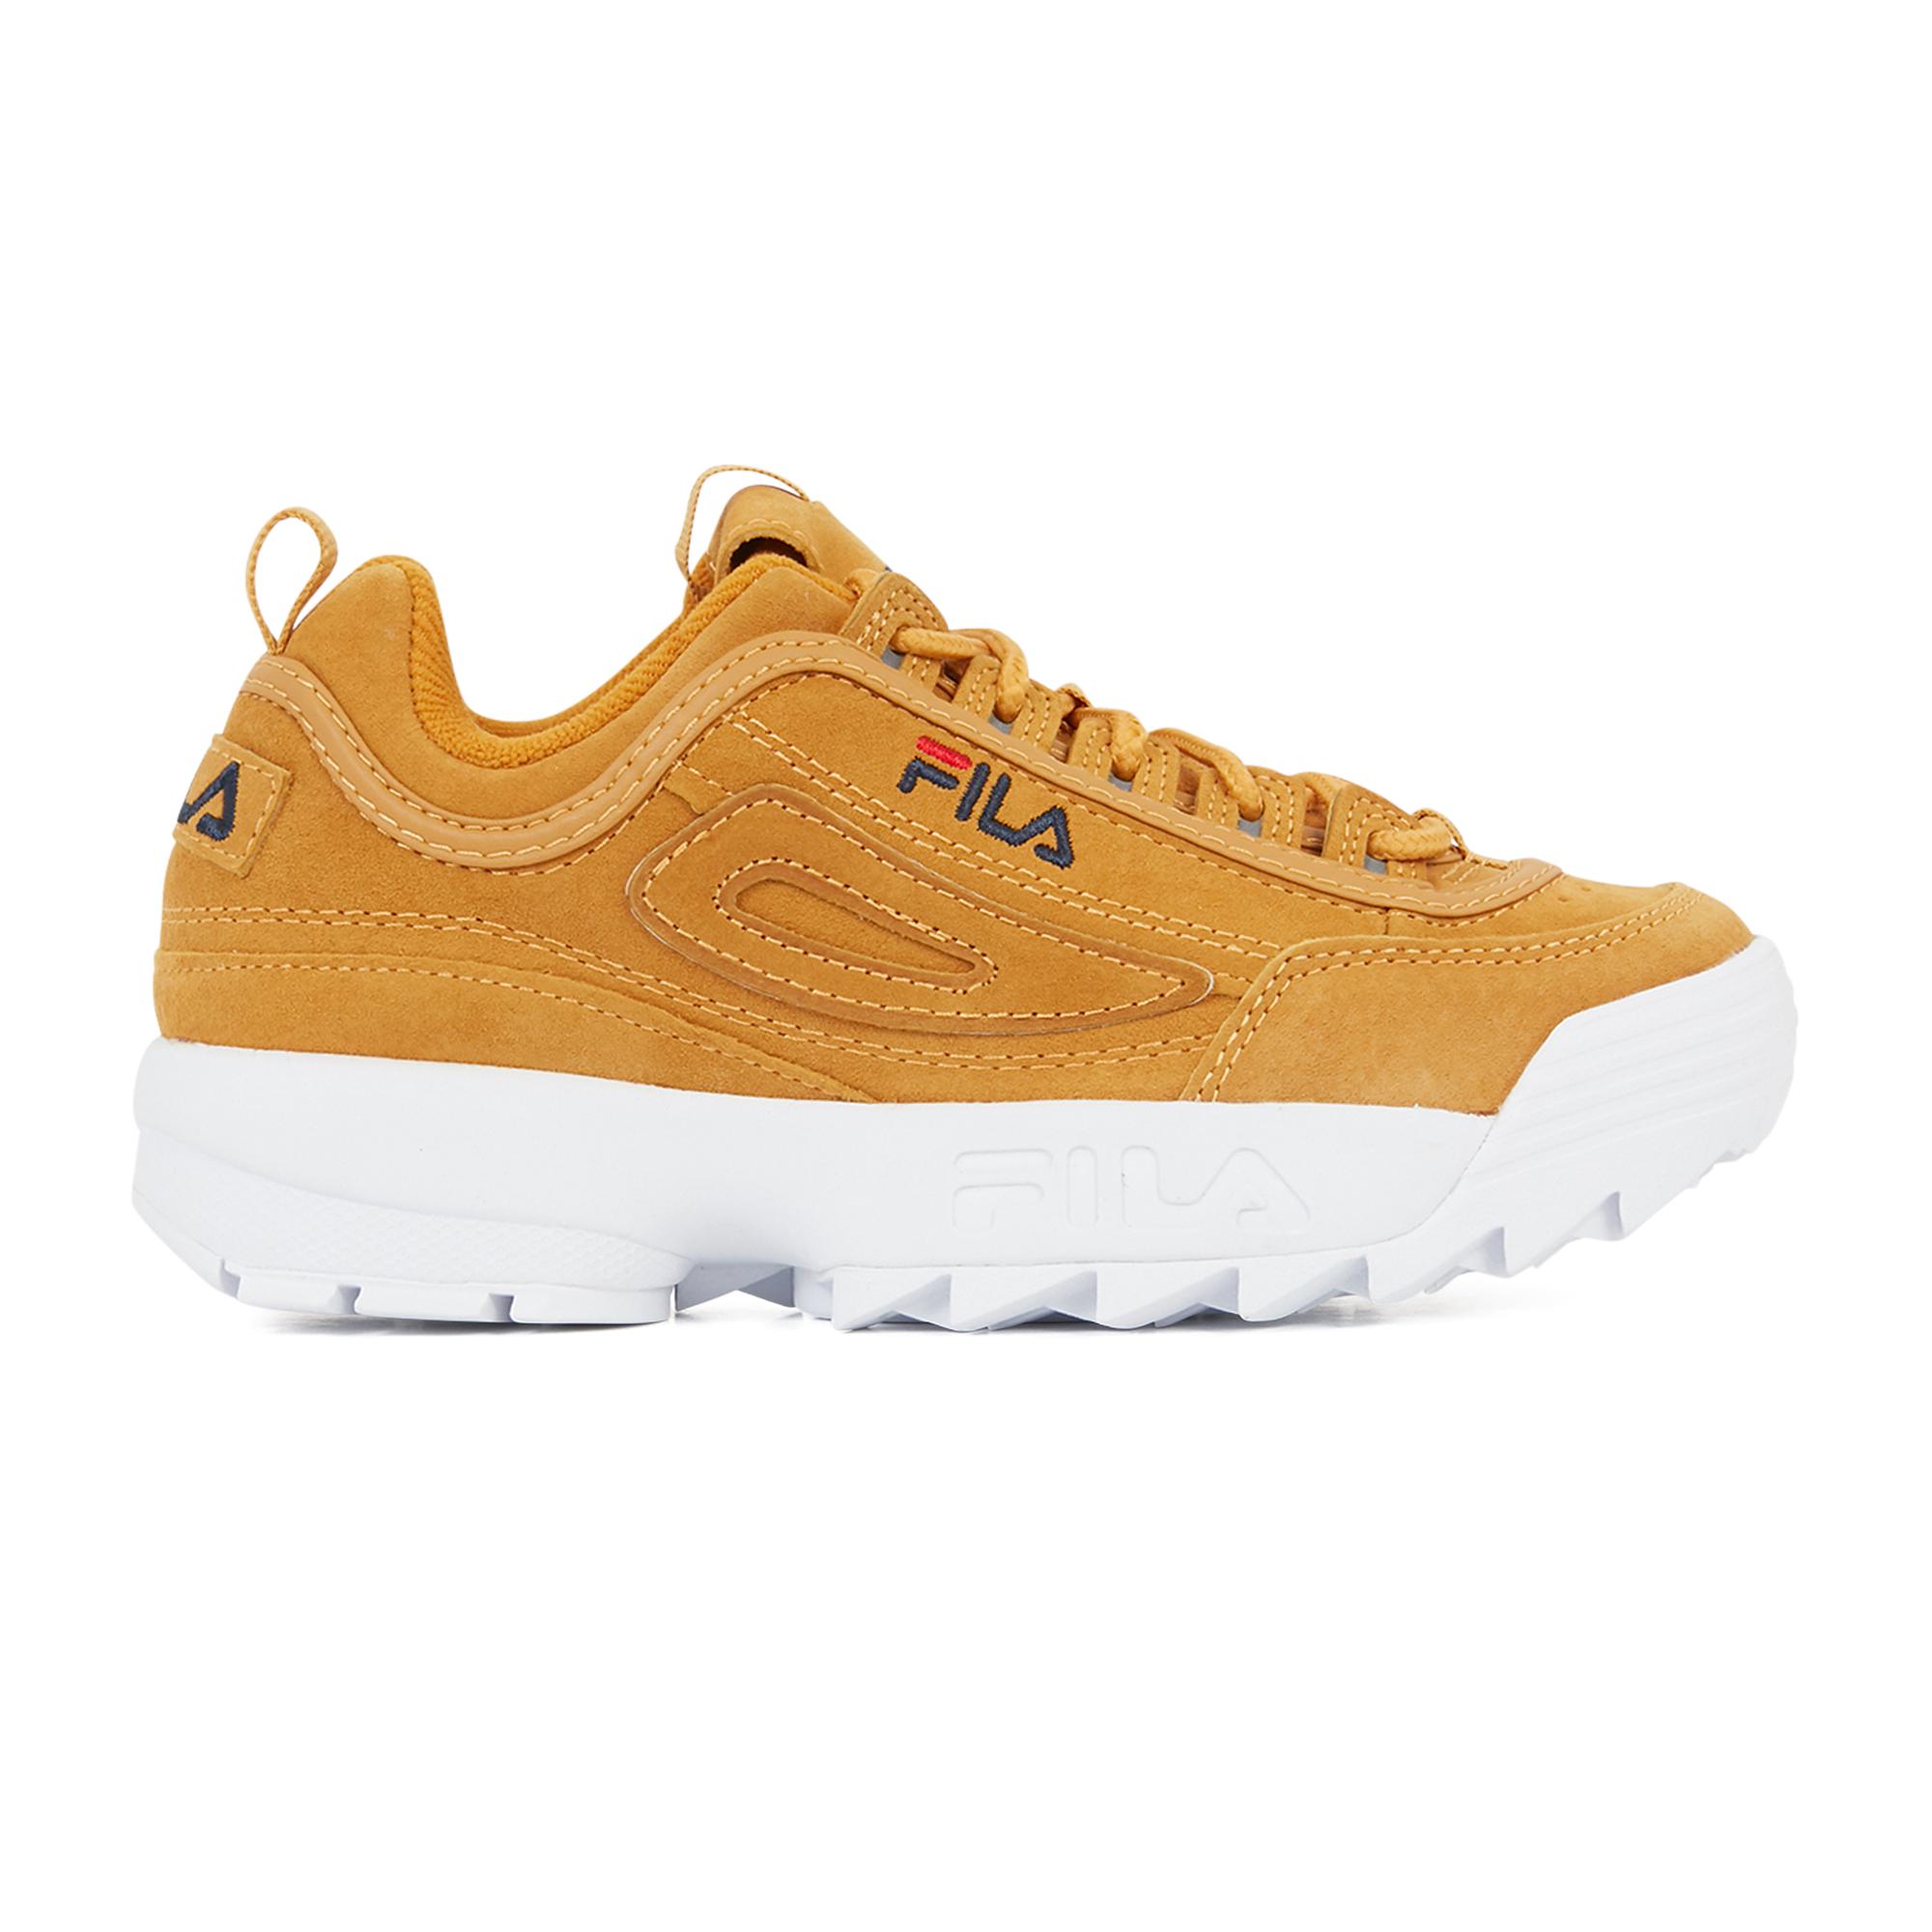 Purchase > fila disruptor jaune moutarde, Up to 68% OFF